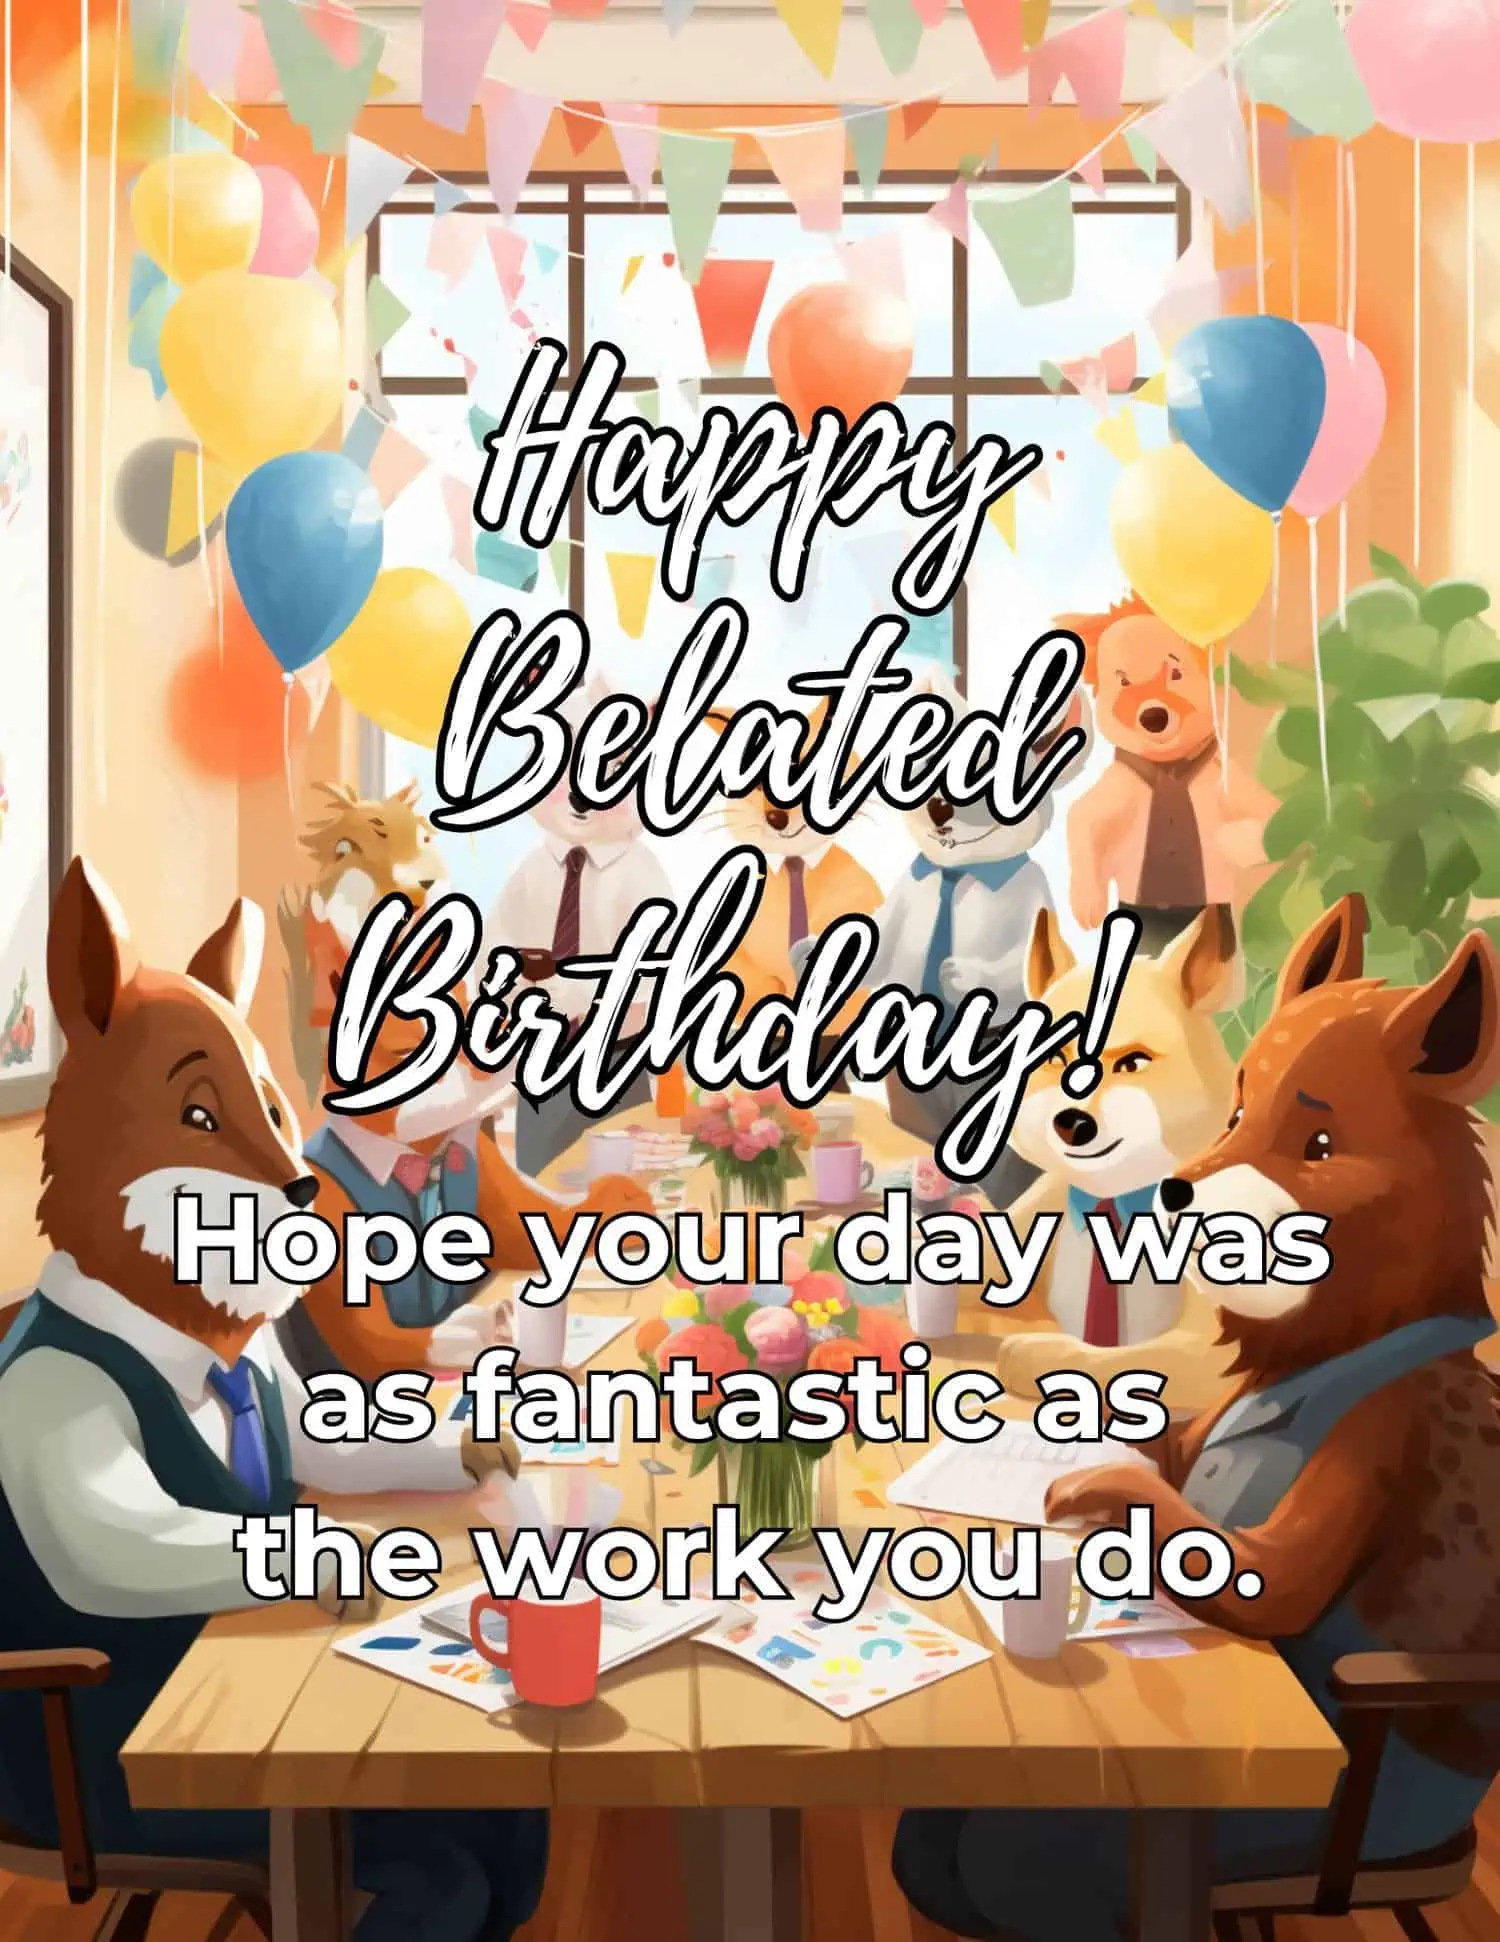 A collection of professional yet warm belated birthday wishes for colleagues, ideal for showing care and maintaining positive workplace relationships, even when you've missed their special day.